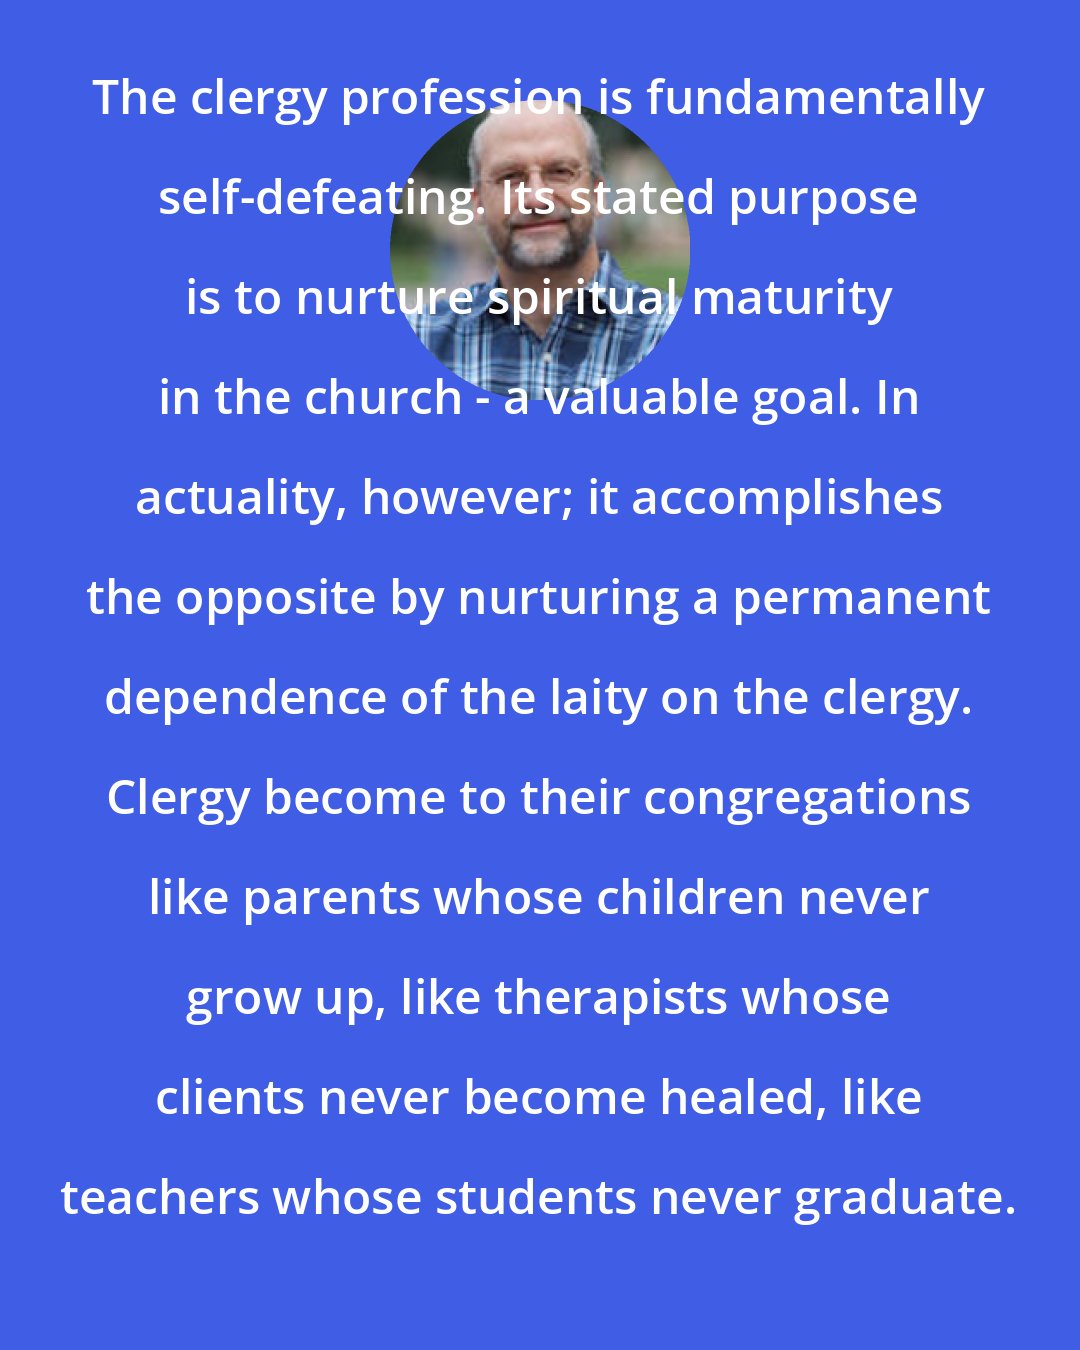 Christian Smith: The clergy profession is fundamentally self-defeating. Its stated purpose is to nurture spiritual maturity in the church - a valuable goal. In actuality, however; it accomplishes the opposite by nurturing a permanent dependence of the laity on the clergy. Clergy become to their congregations like parents whose children never grow up, like therapists whose clients never become healed, like teachers whose students never graduate.